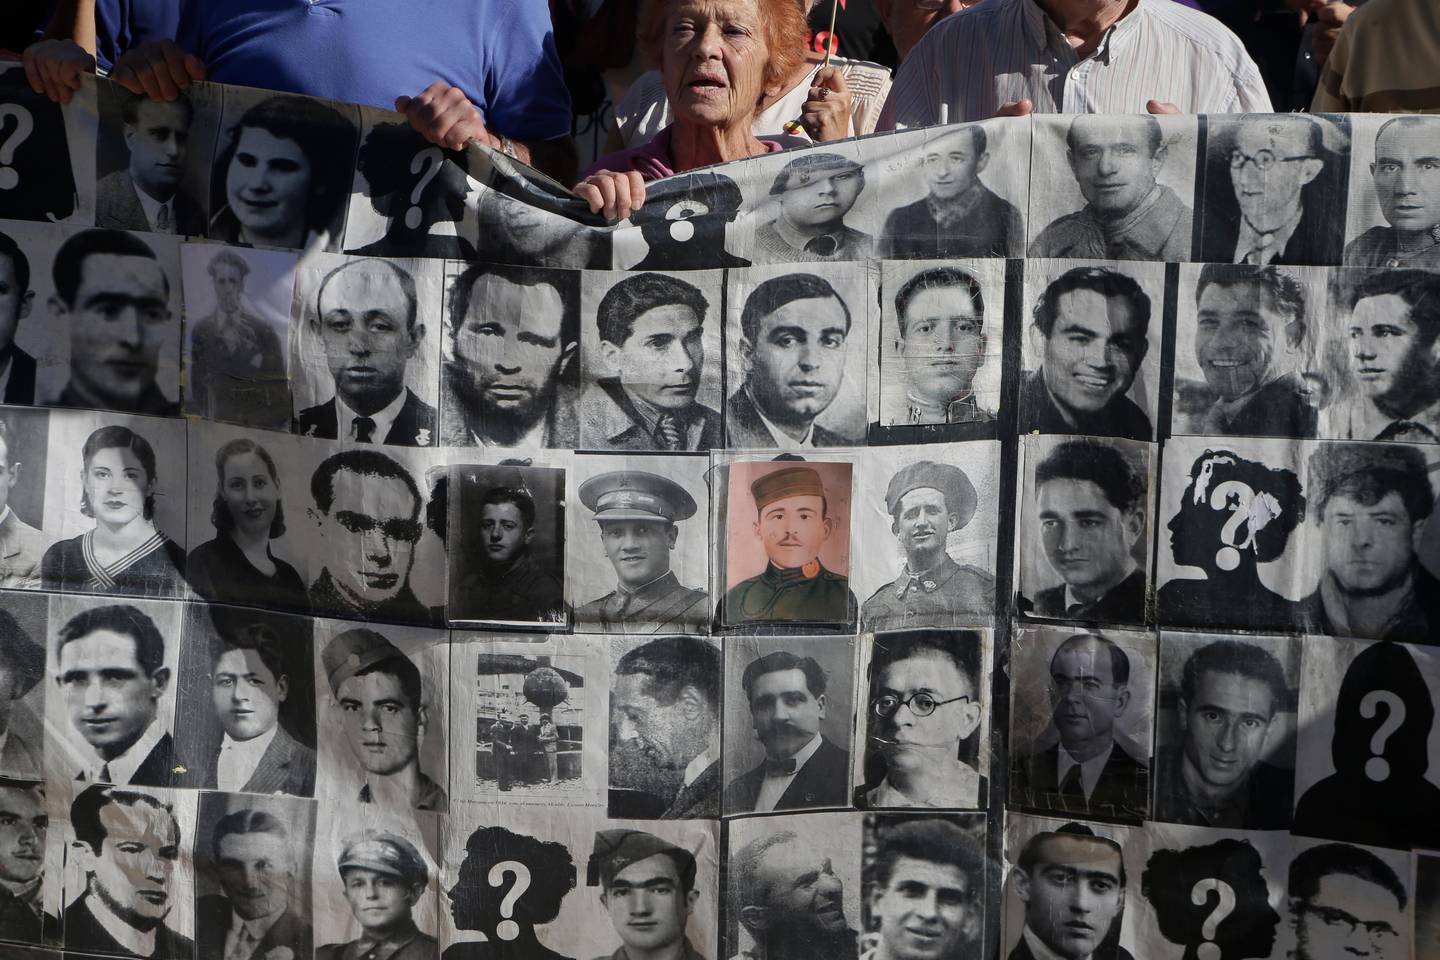 Protesters hold a banner showing photos of Spanish Civil War victims, outside the Supreme Court in Madrid, Spain, Tuesday, Sept. 24, 2019. The Spanish Supreme Court has ruled that the caretaker Socialist government can exhume the remains of former dictator Gen. Francisco Franco. Six judges met to decide on an appeal by Franco's relatives against the government plan to remove the body from the gigantic Valley of the Fallen mausoleum he built on the outskirts of Madrid and take it to a cemetery elsewhere. (AP Photo/Paul White)